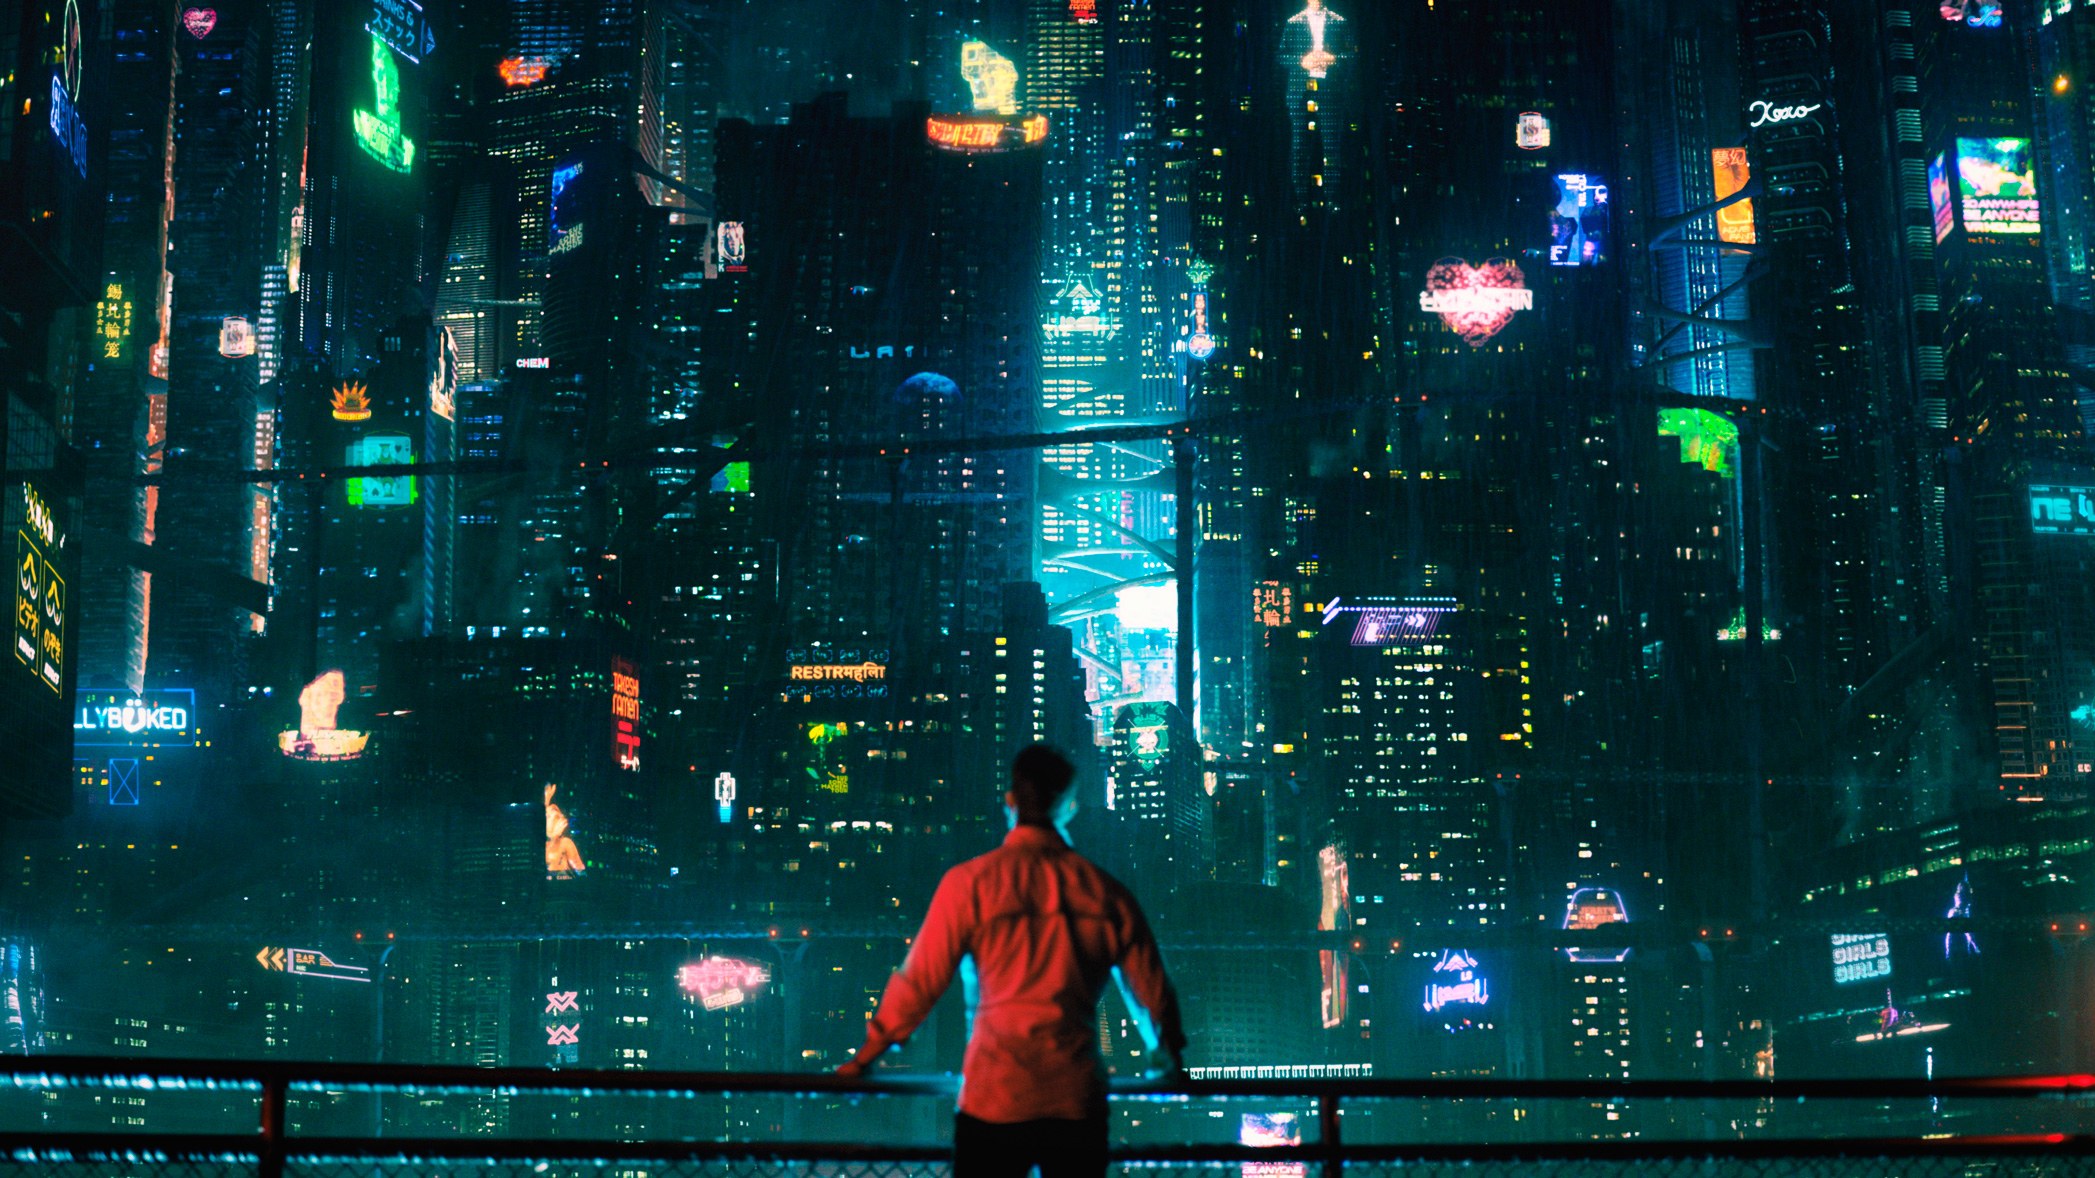 altered carbon - Long